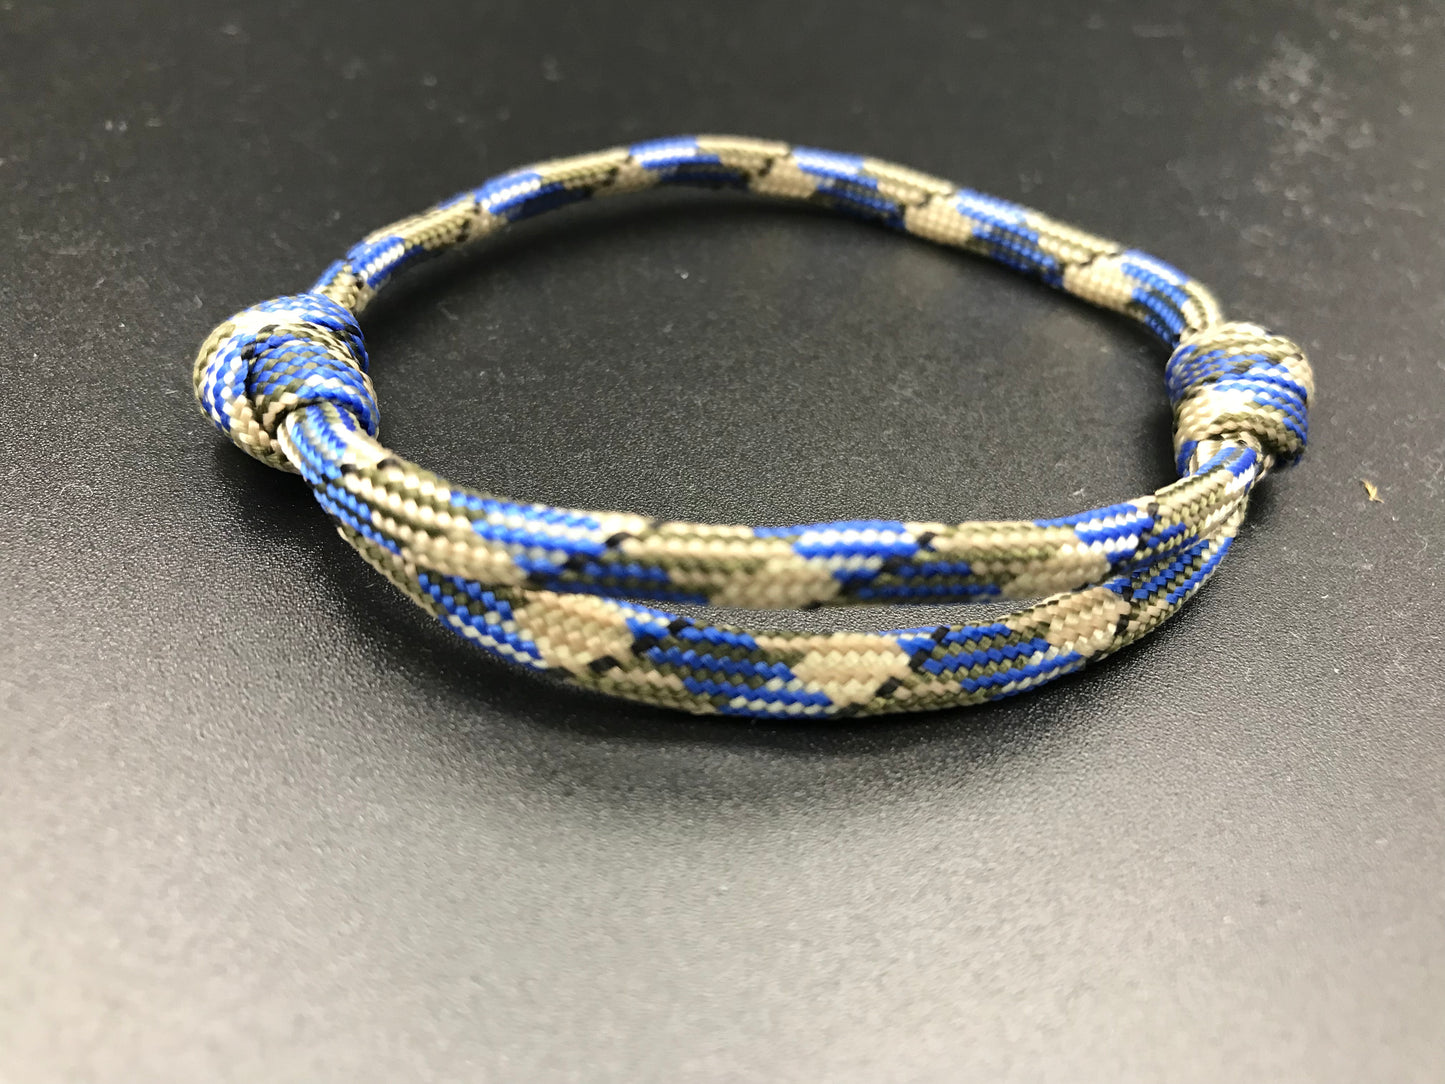 Paracord friendship bracelet in blue & grey camo fully adjustable and light weight 